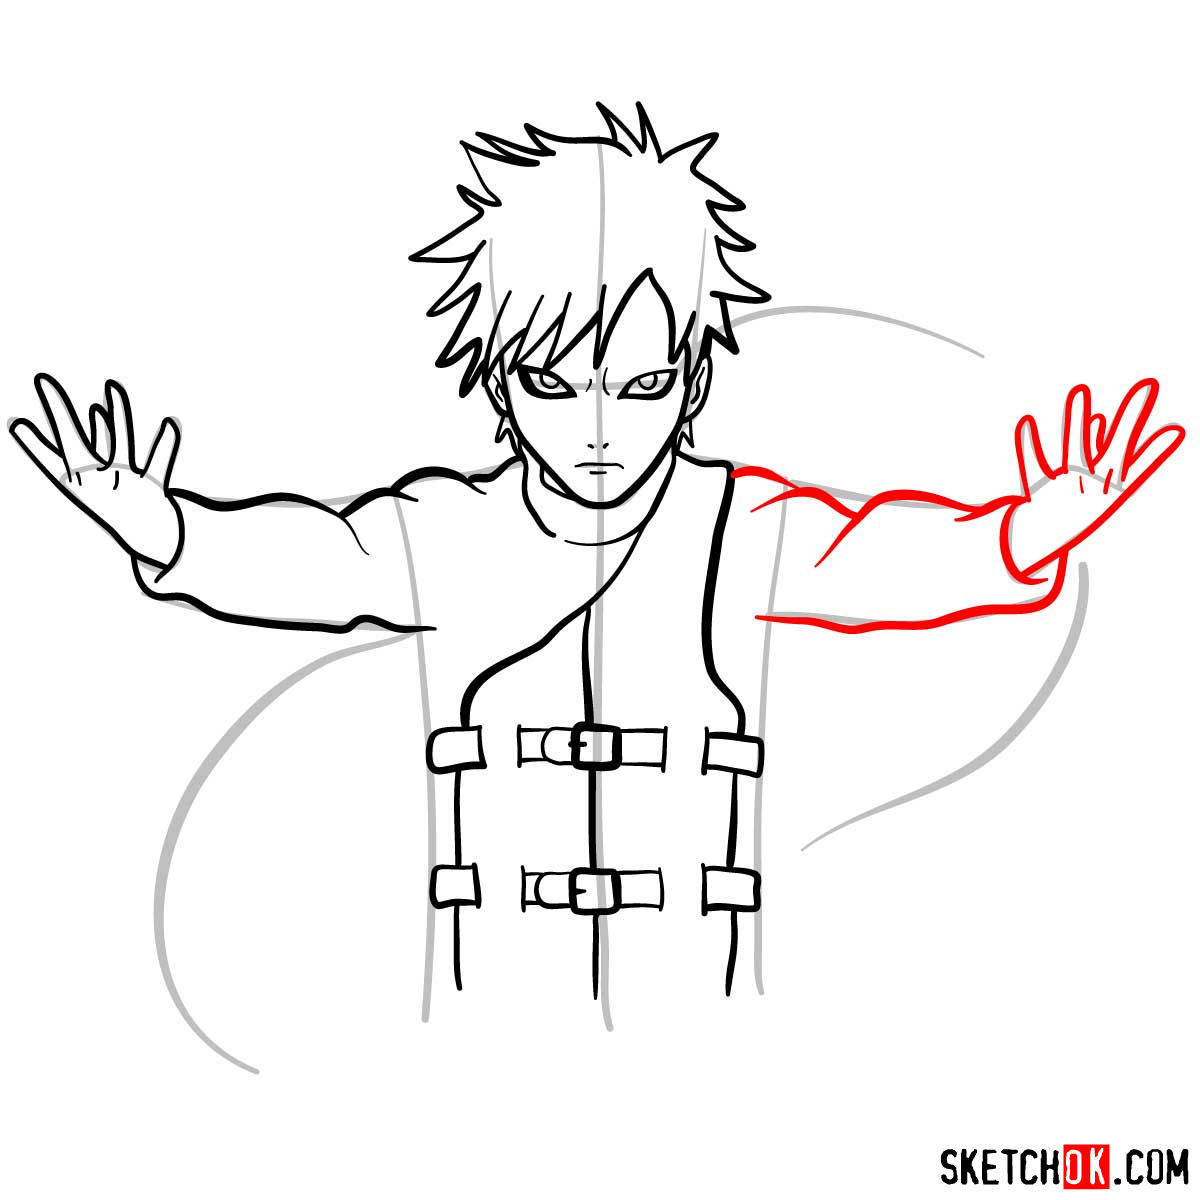 How to draw Gaara from Naruto anime - step 09